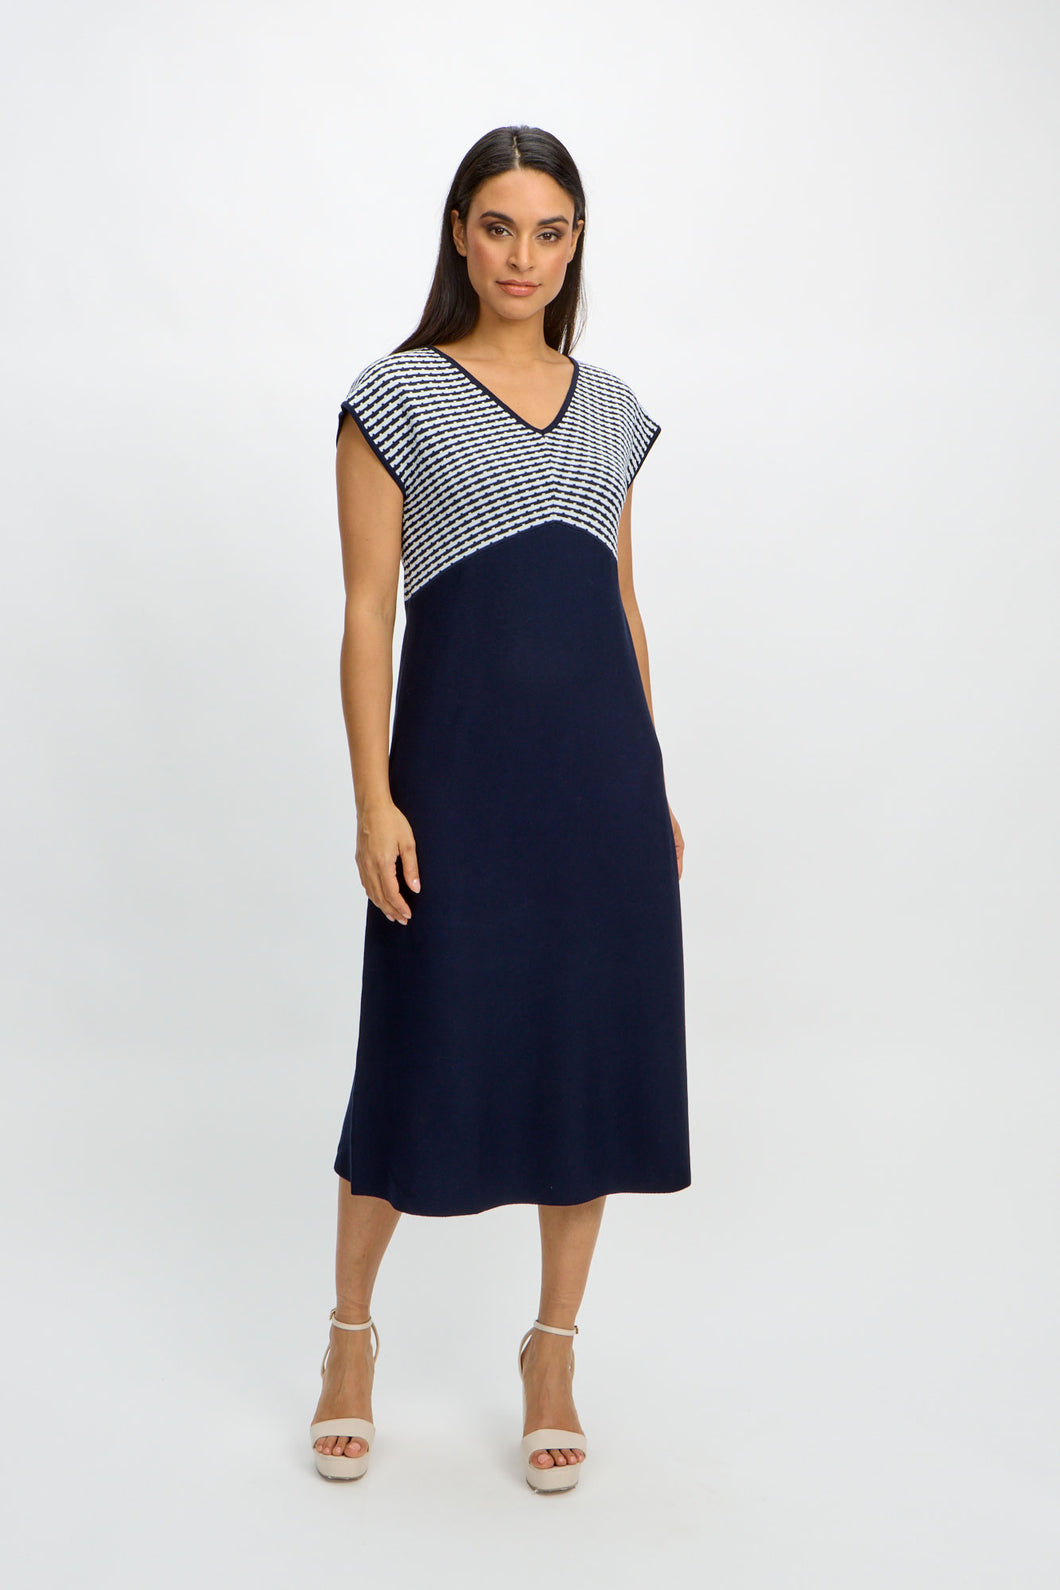 Rayon and Recyled Polyester 2 tone dress/Marine Blue